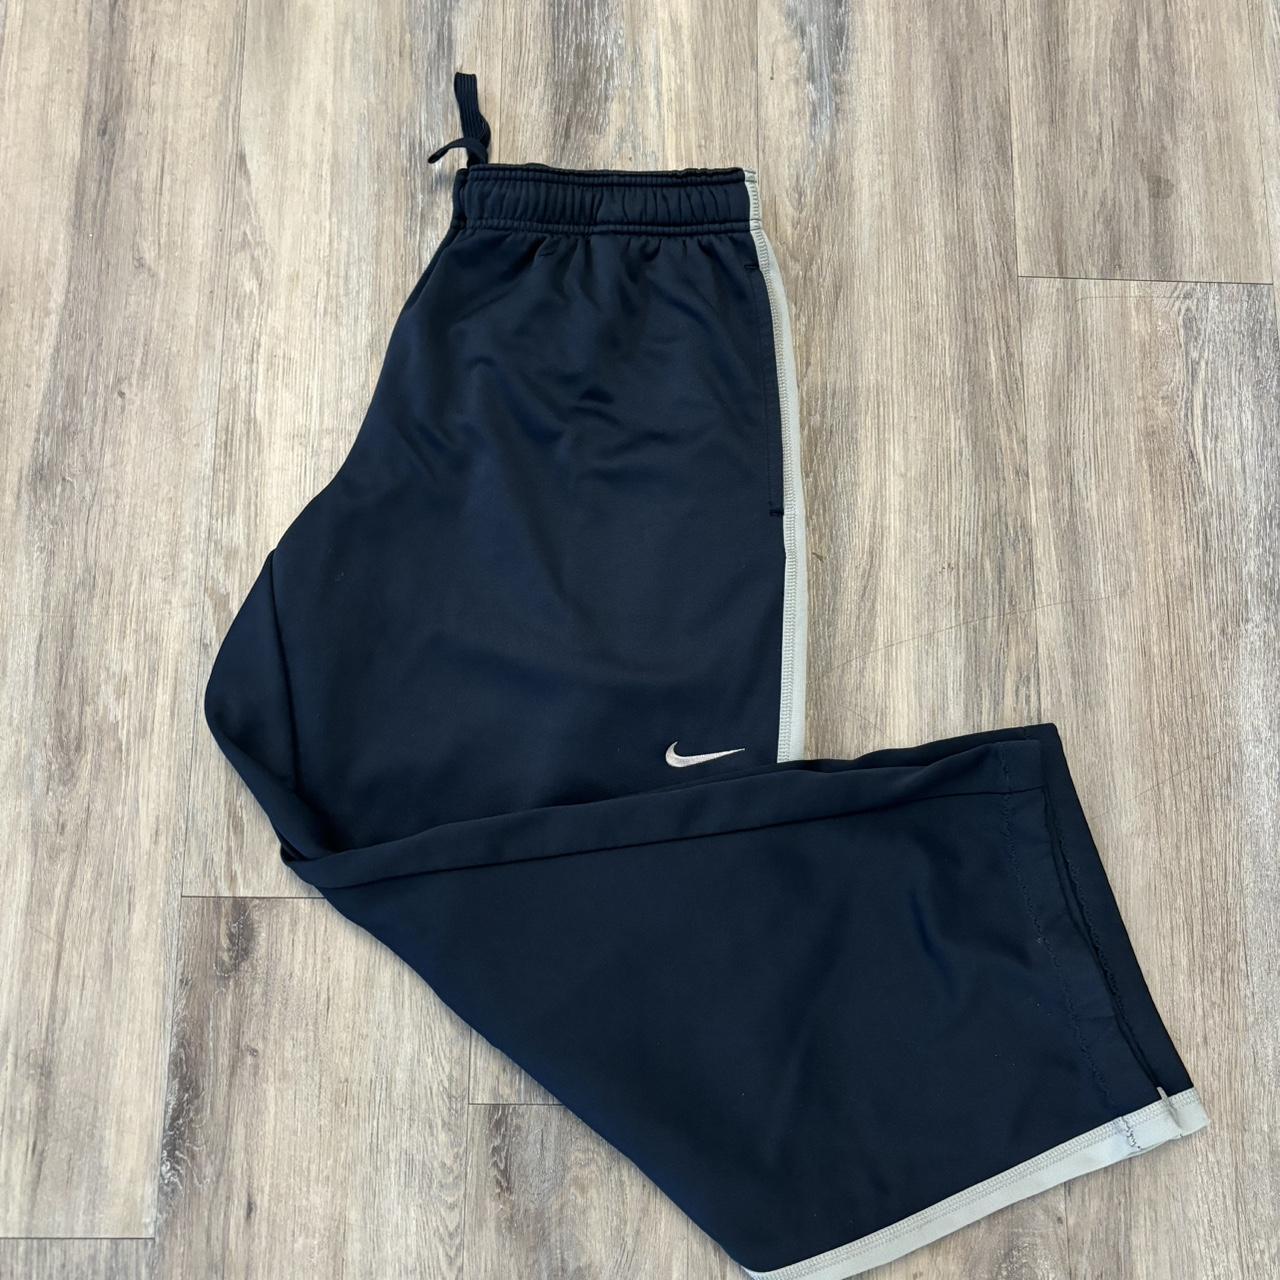 Nike Therma-Fit navy blue sweatpants. Super fun and... - Depop